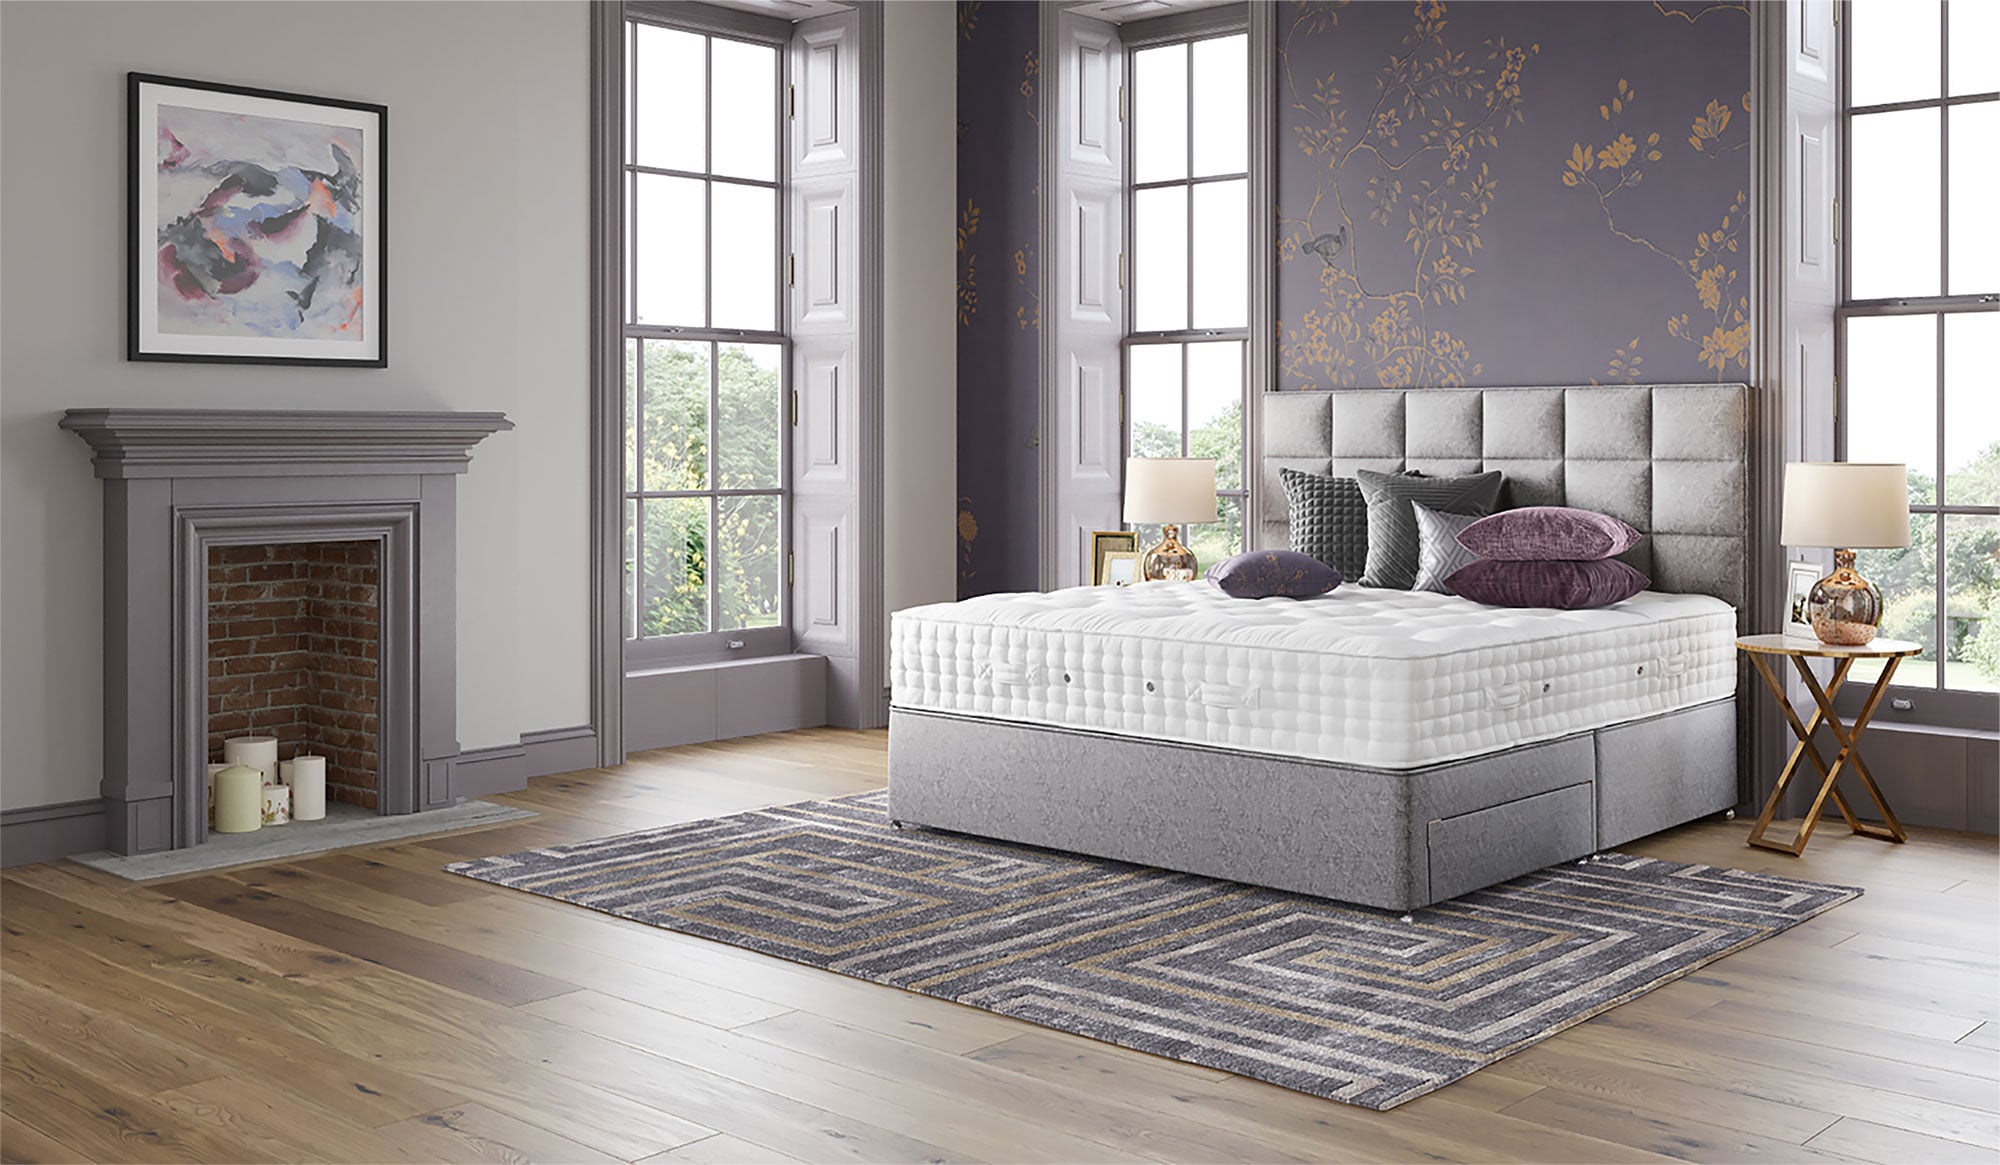 beds and mattresses online uk